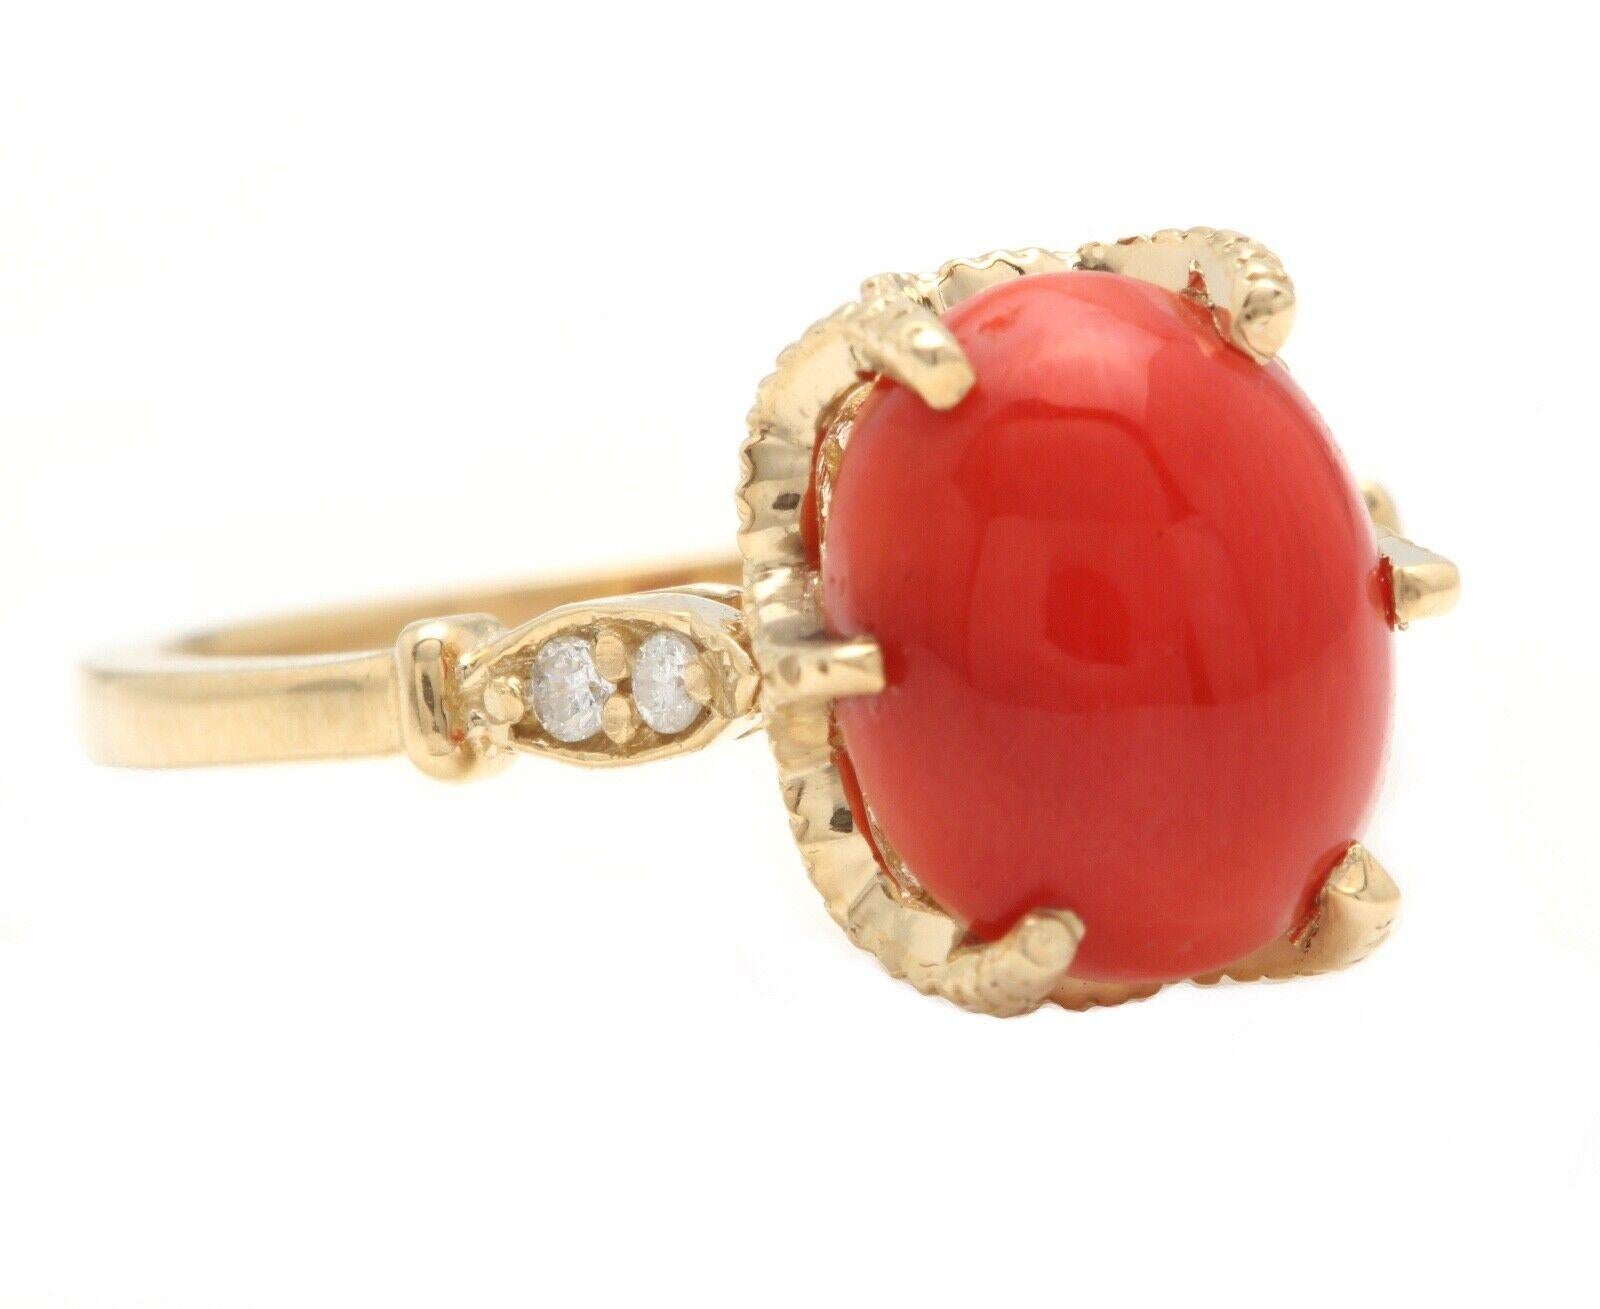 2.58 Carats Natural Impressive Coral and Diamond 14K Solid Yellow Gold Ring

Suggested Replacement Value $4,500.00

Total Natural Oval Coral Weight is: Approx. 2.50 Carats 

Coral Measures: 10.00 x 8.00 mm 

Natural Round Diamonds Weight: Approx.